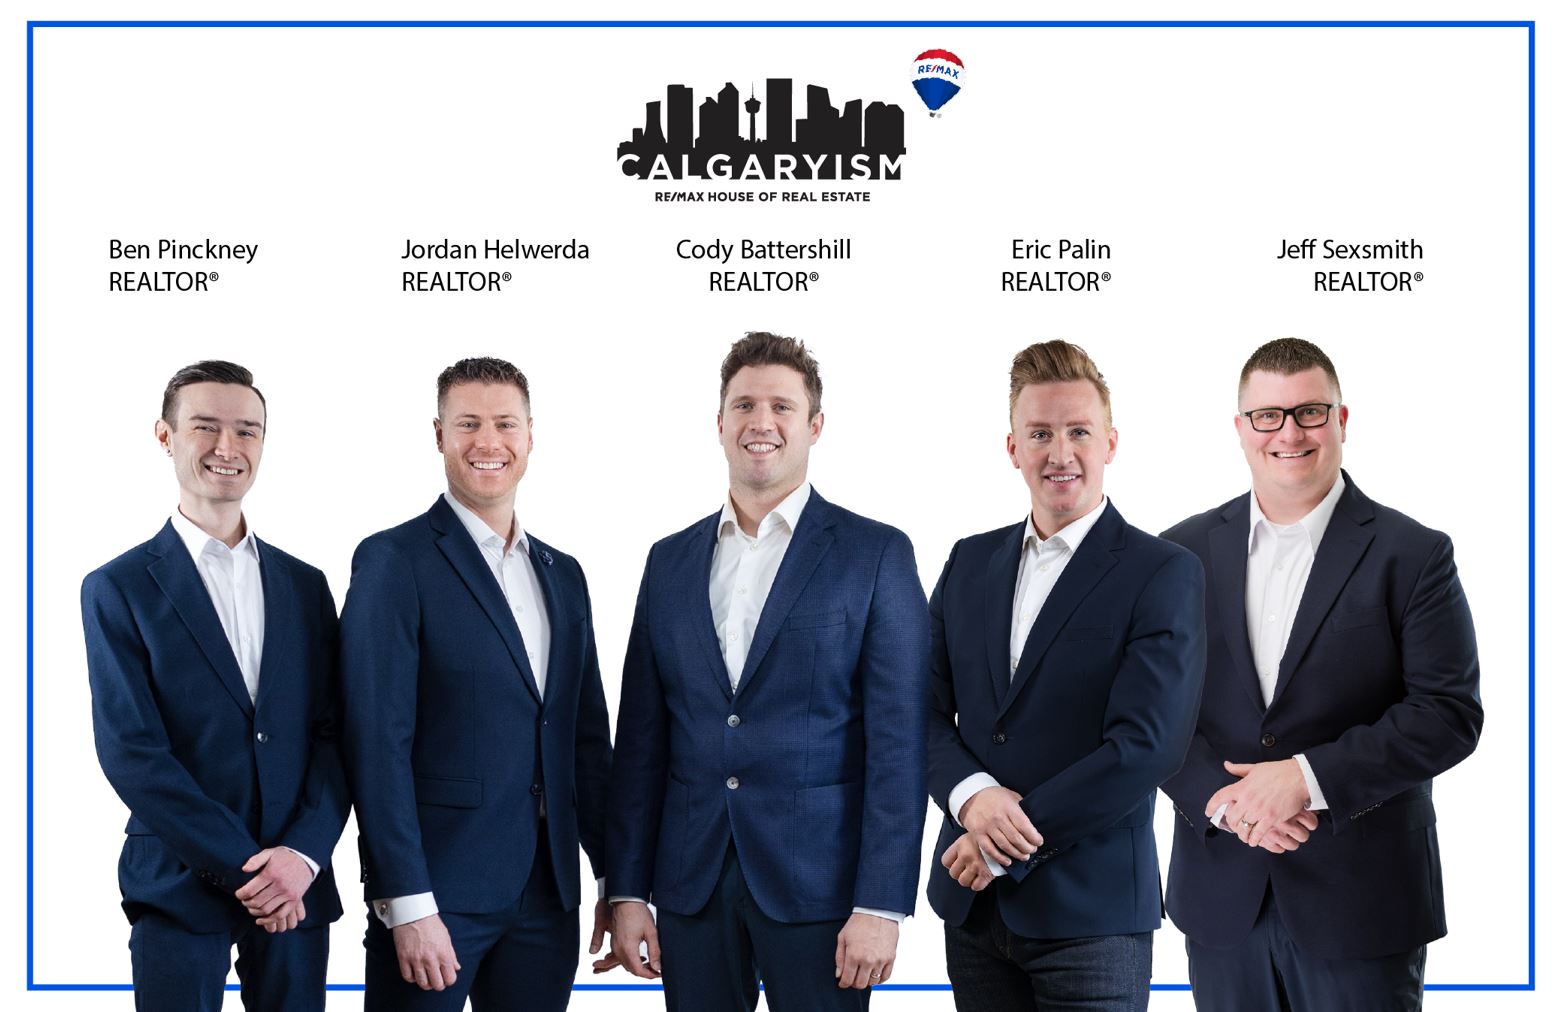 Calgaryism Real Estate Team - Contact Us Today